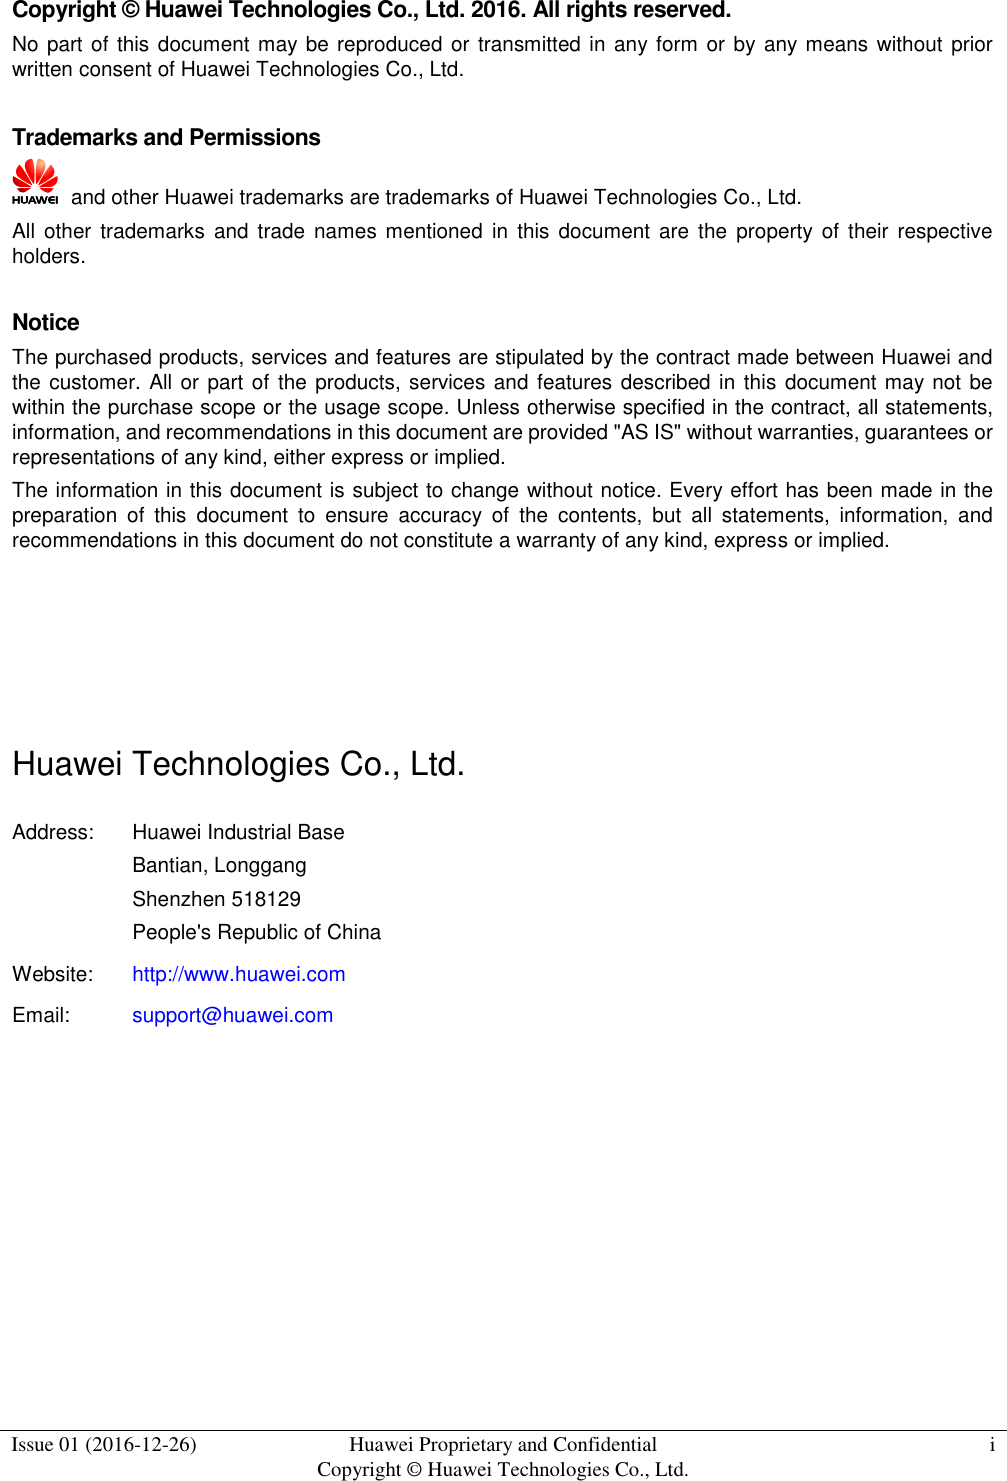  Issue 01 (2016-12-26) Huawei Proprietary and Confidential                                     Copyright © Huawei Technologies Co., Ltd. i    Copyright © Huawei Technologies Co., Ltd. 2016. All rights reserved. No part of this document may be reproduced or transmitted in any form or by any means without prior written consent of Huawei Technologies Co., Ltd.  Trademarks and Permissions   and other Huawei trademarks are trademarks of Huawei Technologies Co., Ltd. All other trademarks  and trade names  mentioned in  this document  are  the  property  of  their respective holders.  Notice The purchased products, services and features are stipulated by the contract made between Huawei and the customer.  All or part of the products, services and features described in this document may not be within the purchase scope or the usage scope. Unless otherwise specified in the contract, all statements, information, and recommendations in this document are provided &quot;AS IS&quot; without warranties, guarantees or representations of any kind, either express or implied. The information in this document is subject to change without notice. Every effort has been made in the preparation  of  this  document  to  ensure  accuracy  of  the  contents,  but  all  statements,  information,  and recommendations in this document do not constitute a warranty of any kind, express or implied.     Huawei Technologies Co., Ltd. Address: Huawei Industrial Base Bantian, Longgang Shenzhen 518129 People&apos;s Republic of China Website: http://www.huawei.com Email: support@huawei.com          